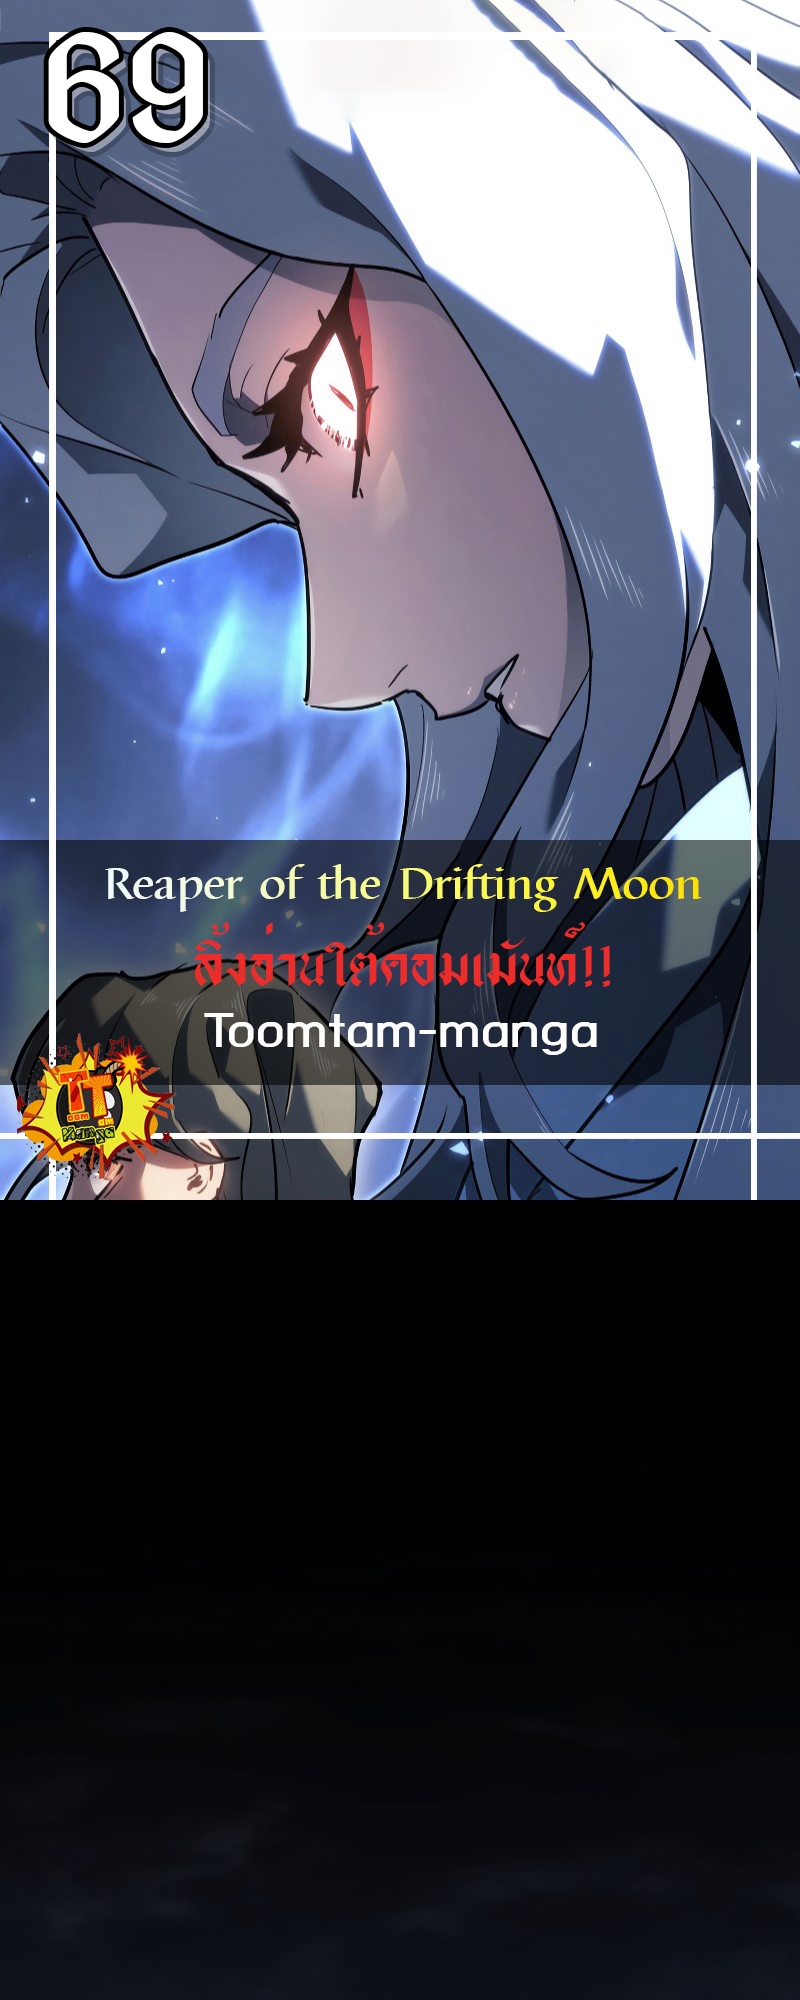 Reaper of the Drifting Moon 69 4 1 25670001